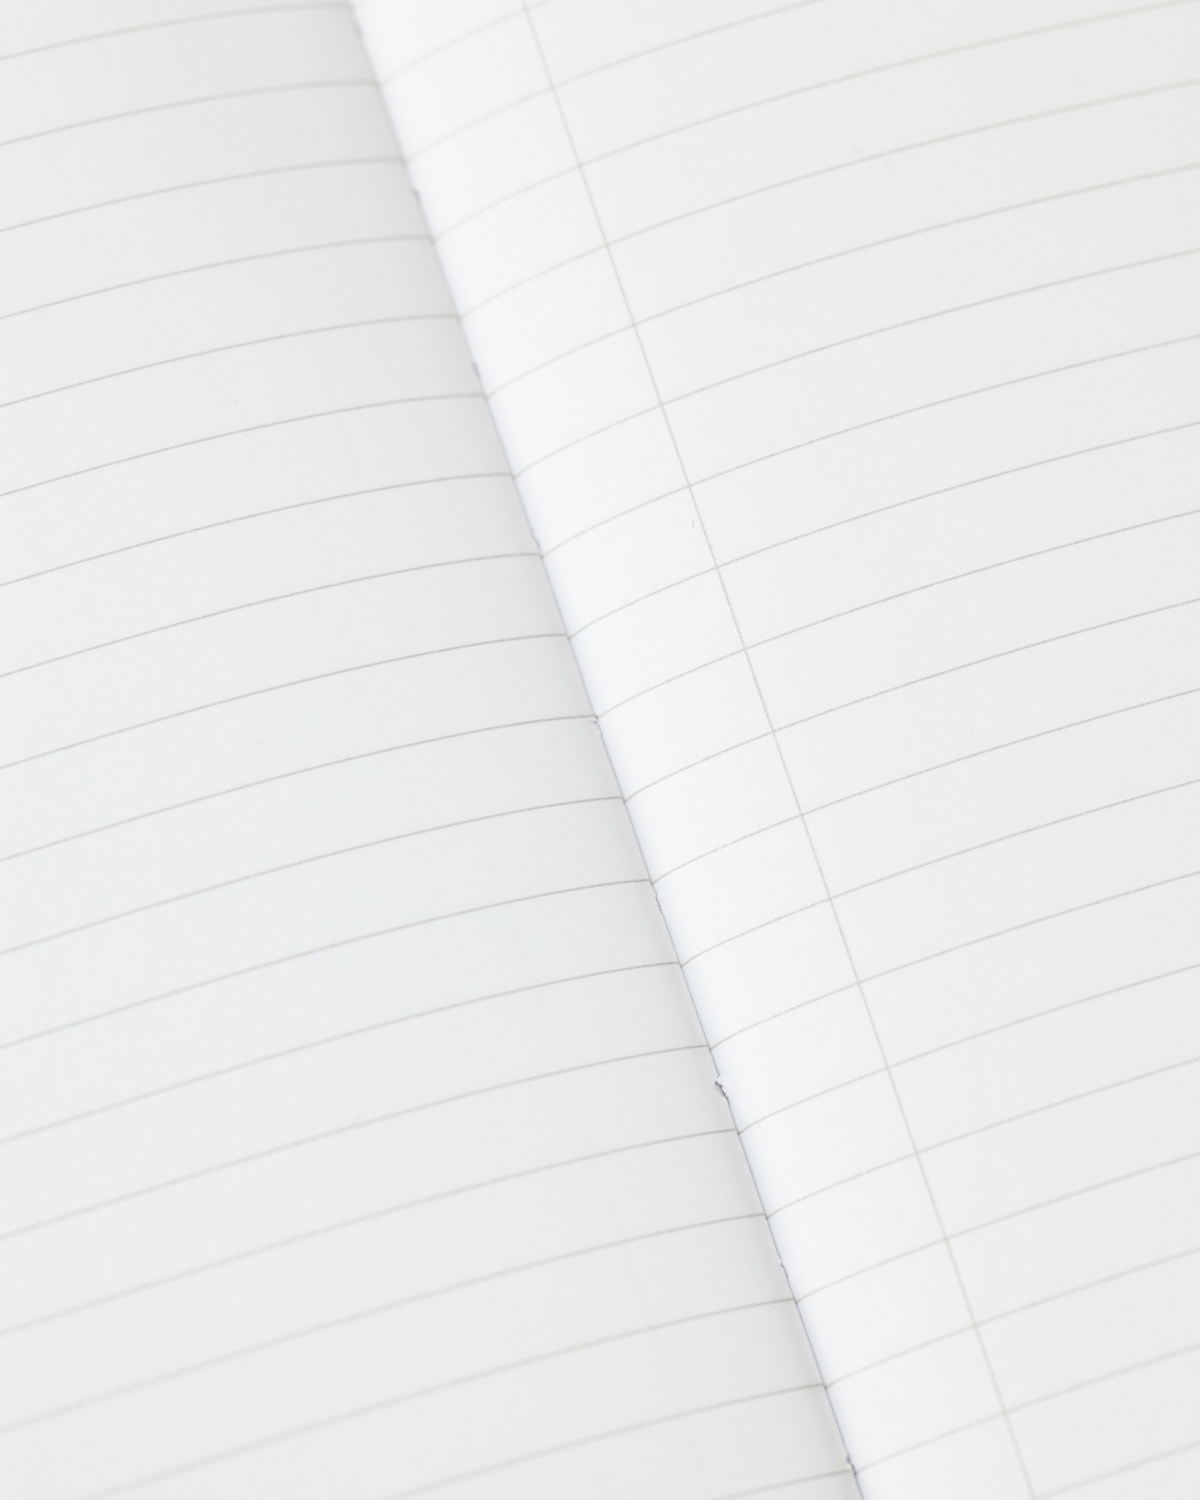 Reproduction Softcover Notebook - Lined